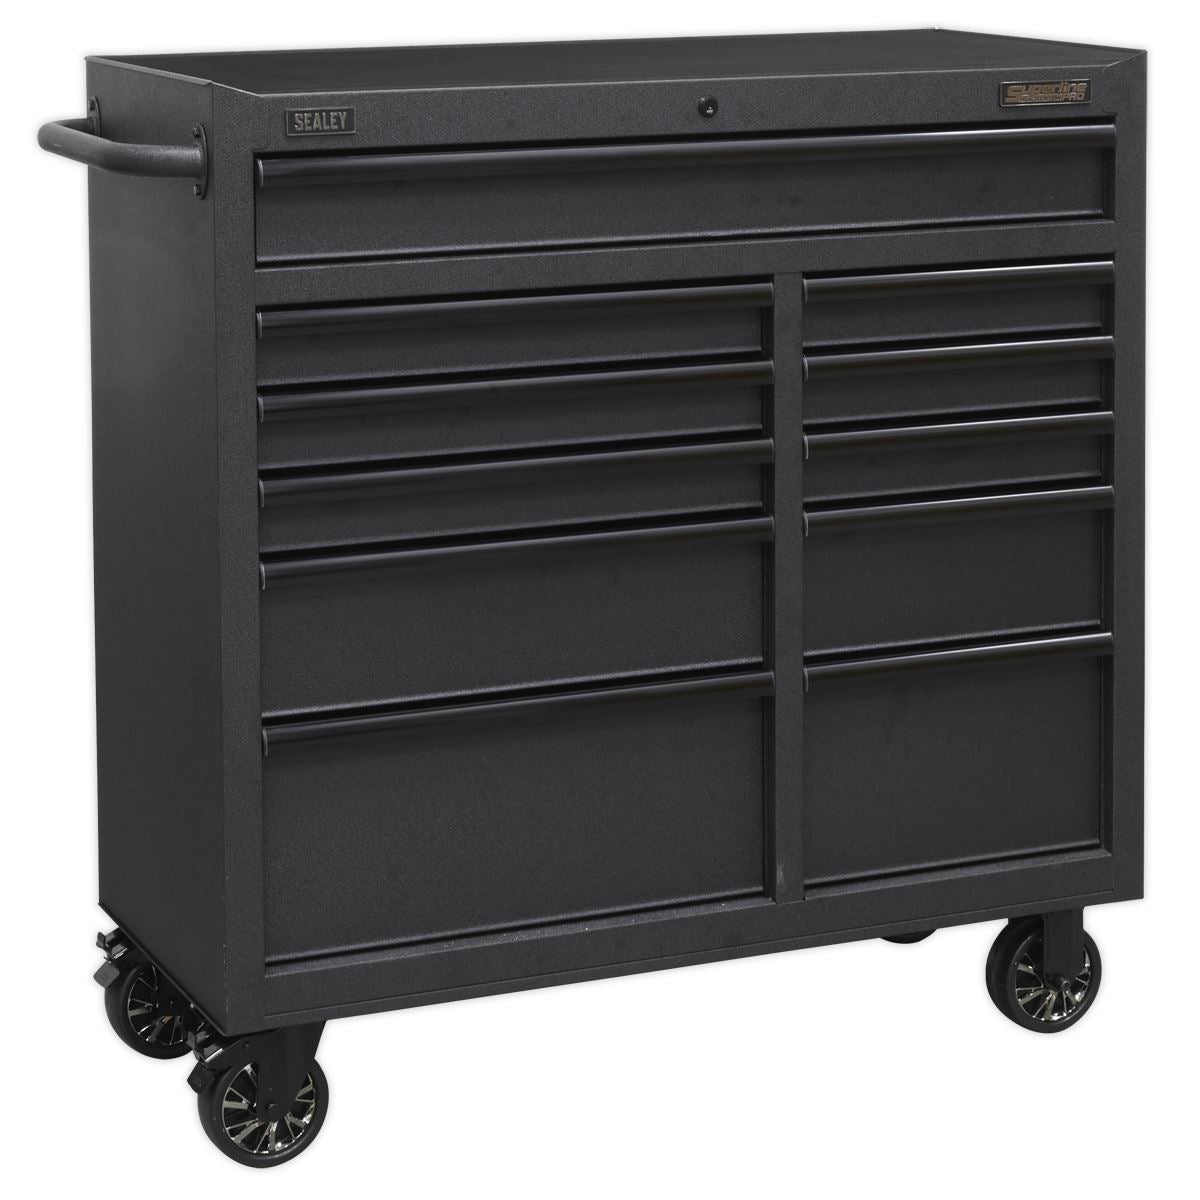 Sealey Superline Pro Rollcab 11 Drawer 1040mm with Soft Close Drawers